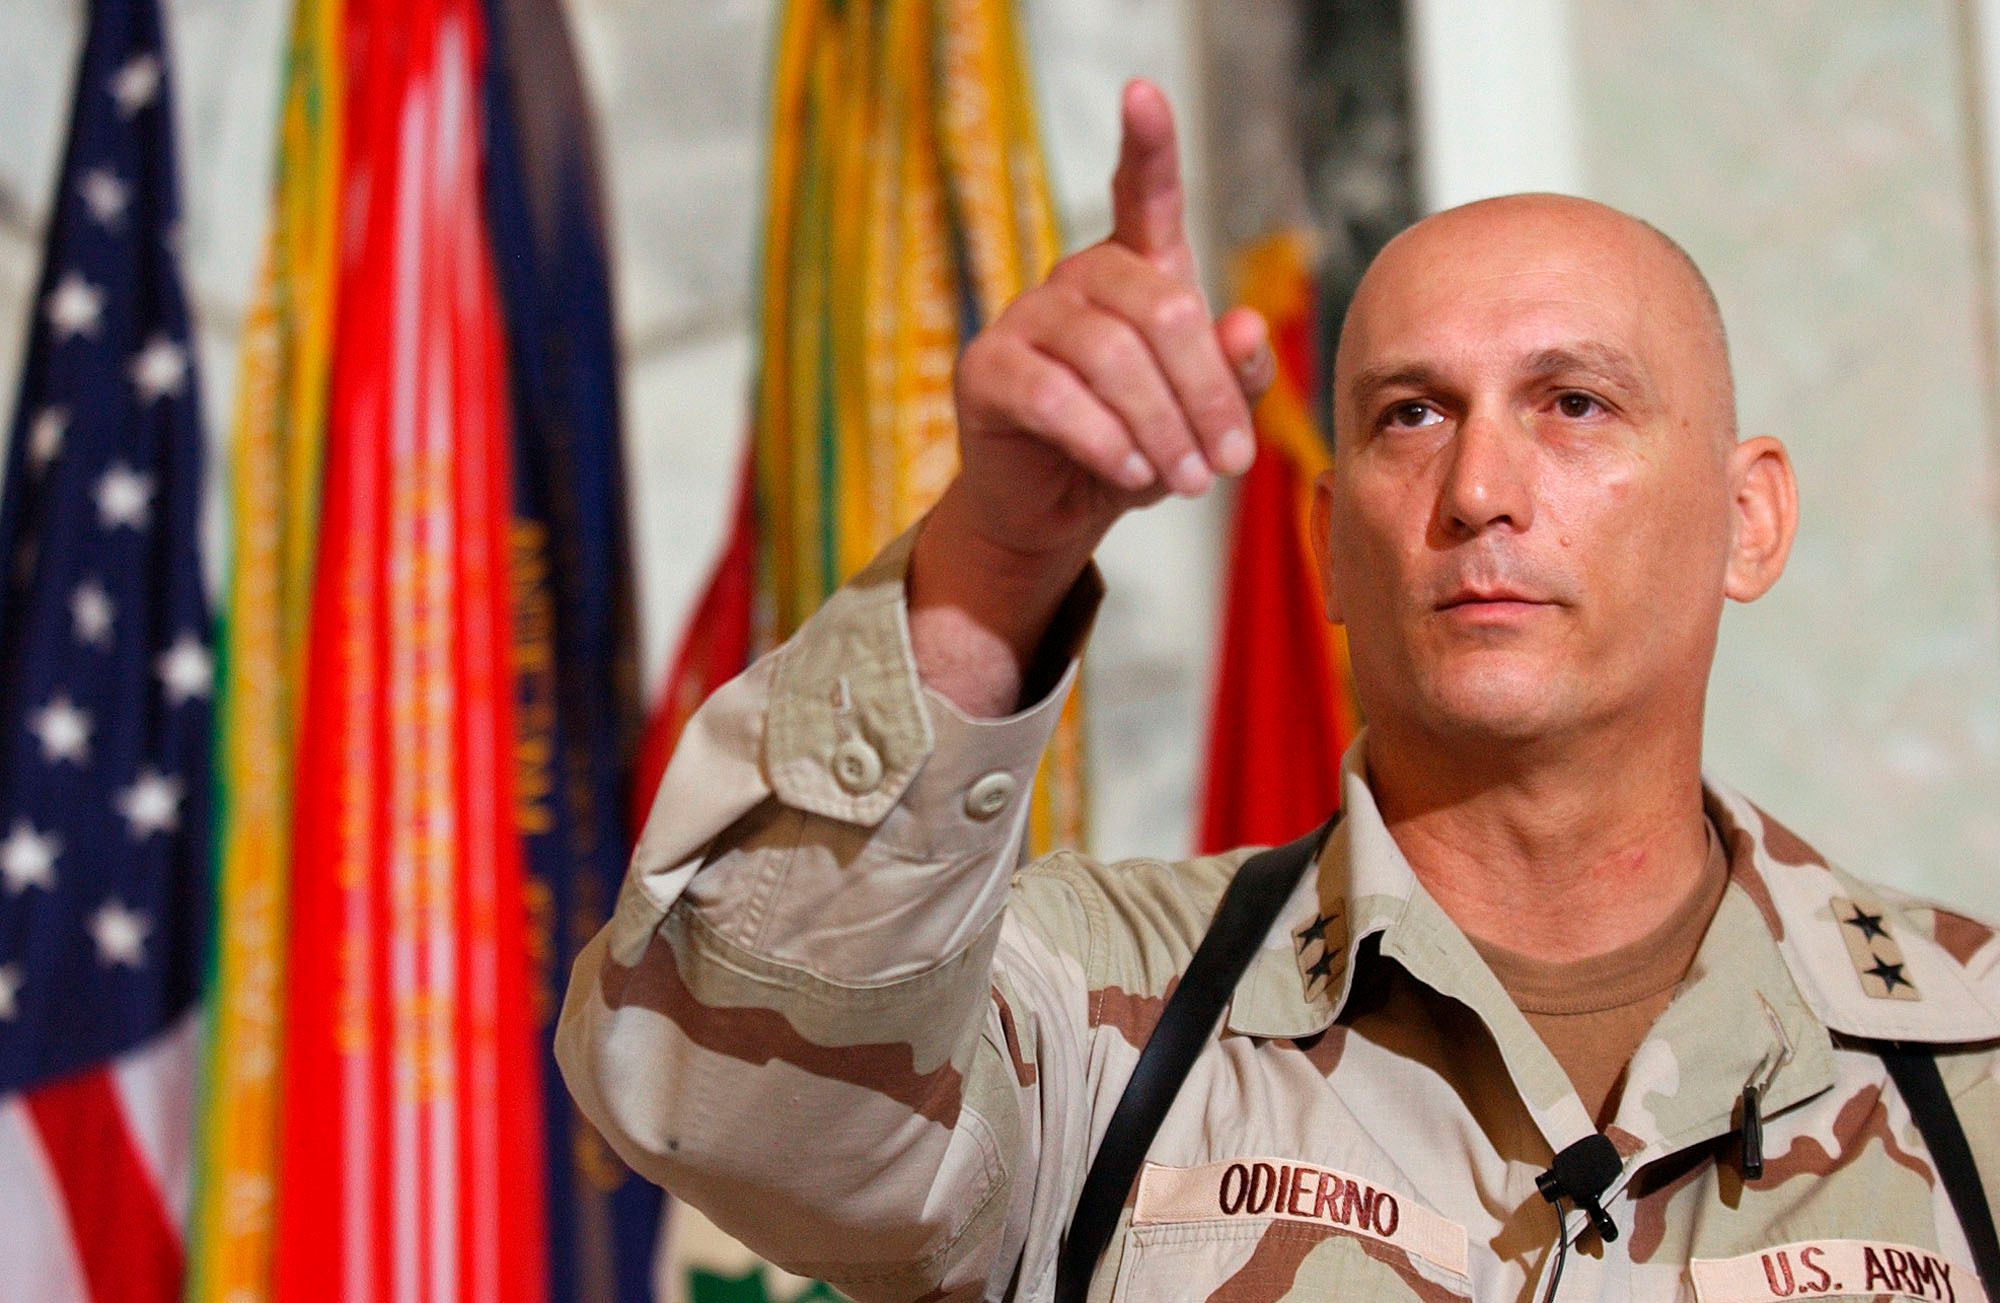 Army General Raymond T. Odierno, who commanded in Iraq, dies of cancer at 67